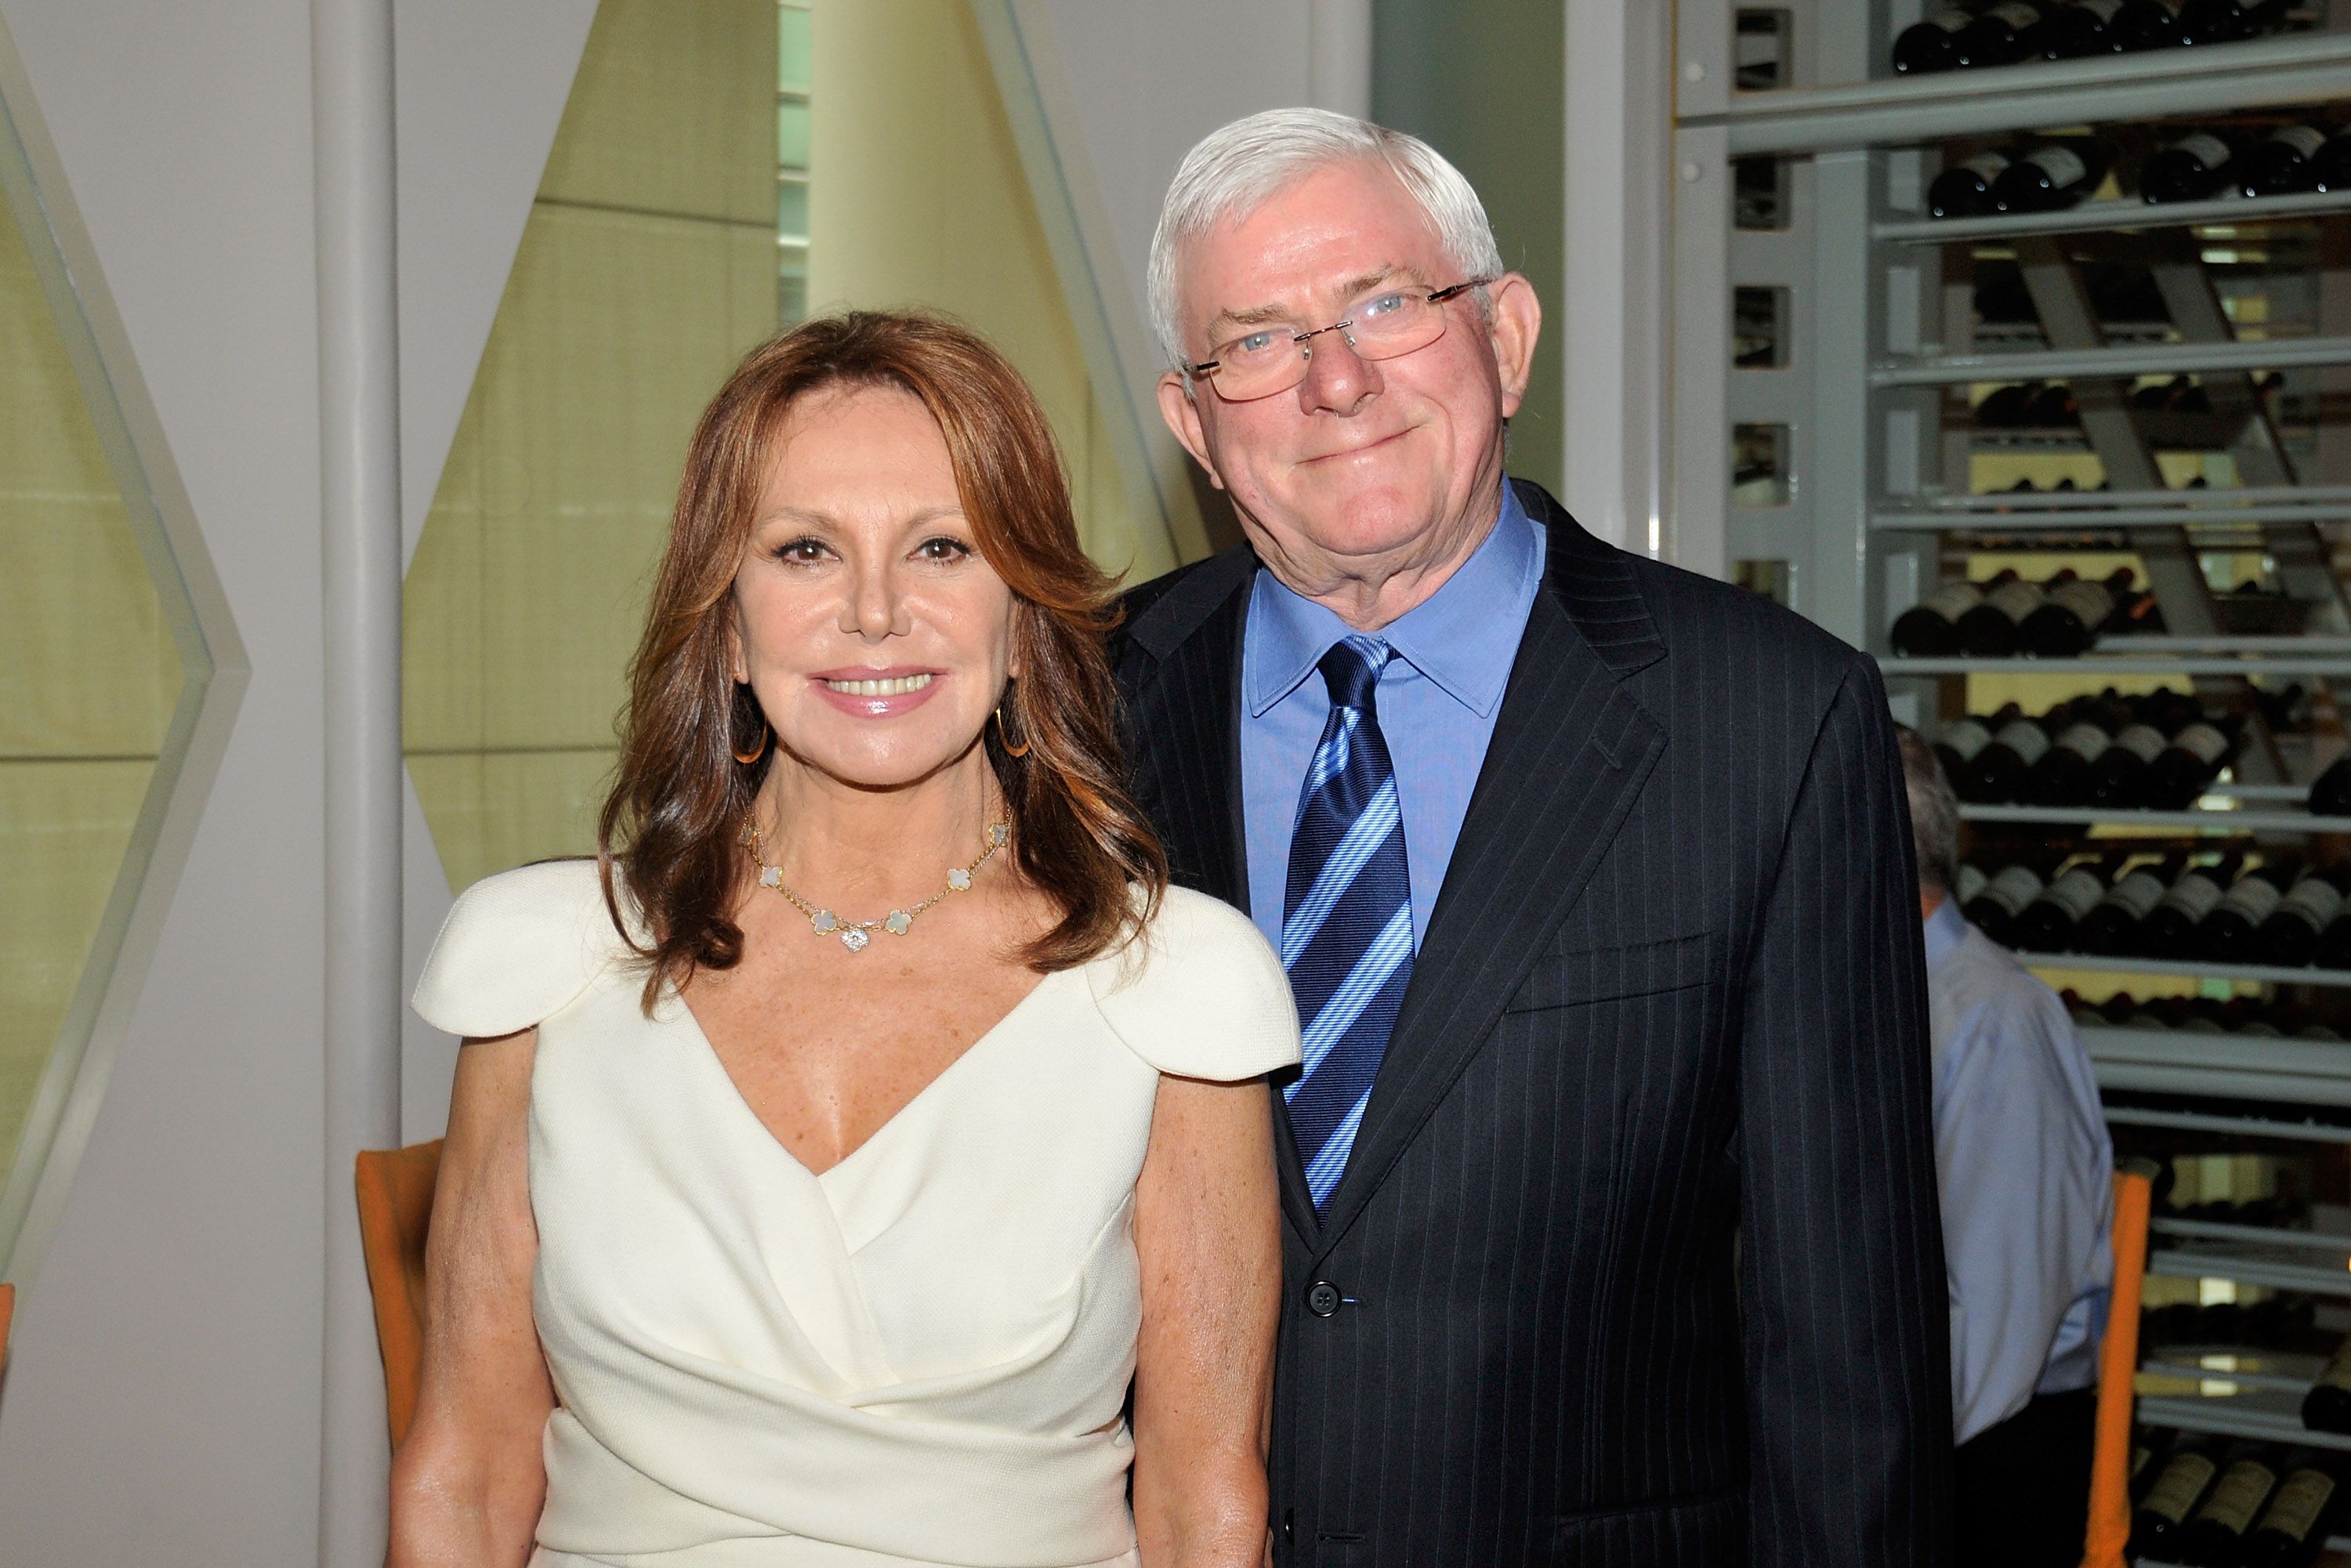 Marlo Thomas and Phil Donahue attend the 2011 Jefferson Awards for Public Service at Le Cirque on June 22, 2011